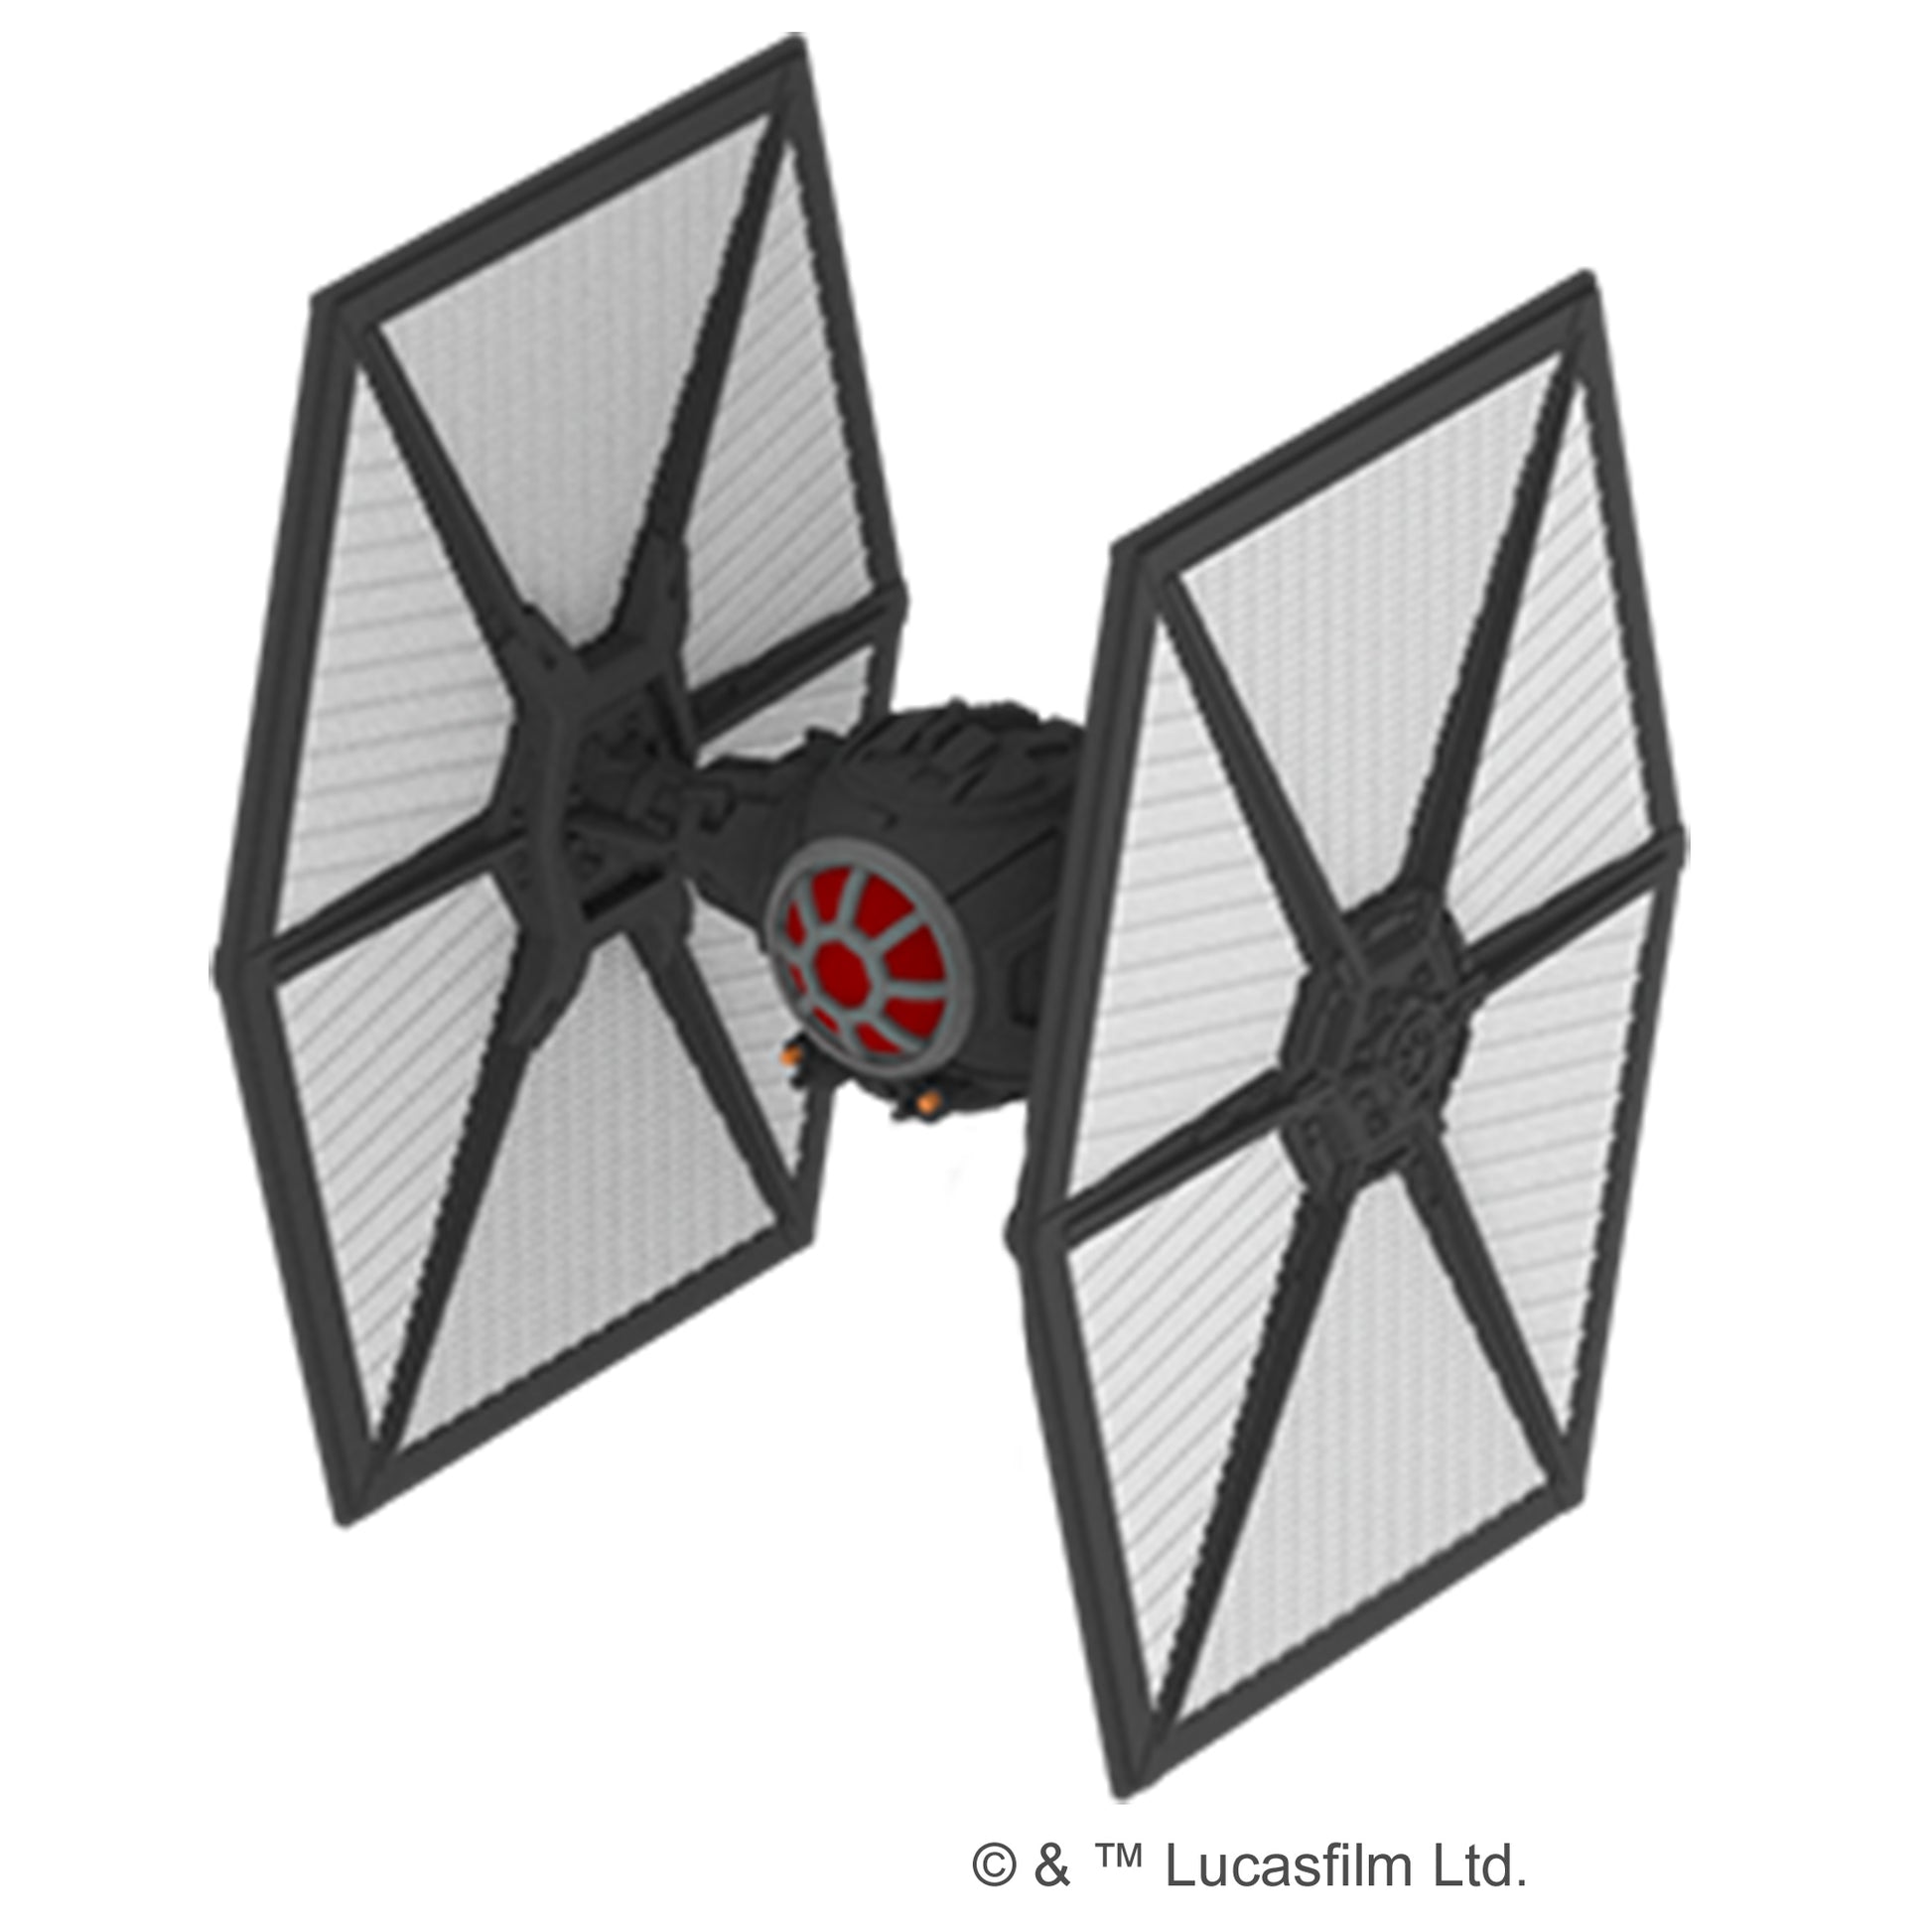 X-Wing 2nd Ed: TIE-fo Fighter